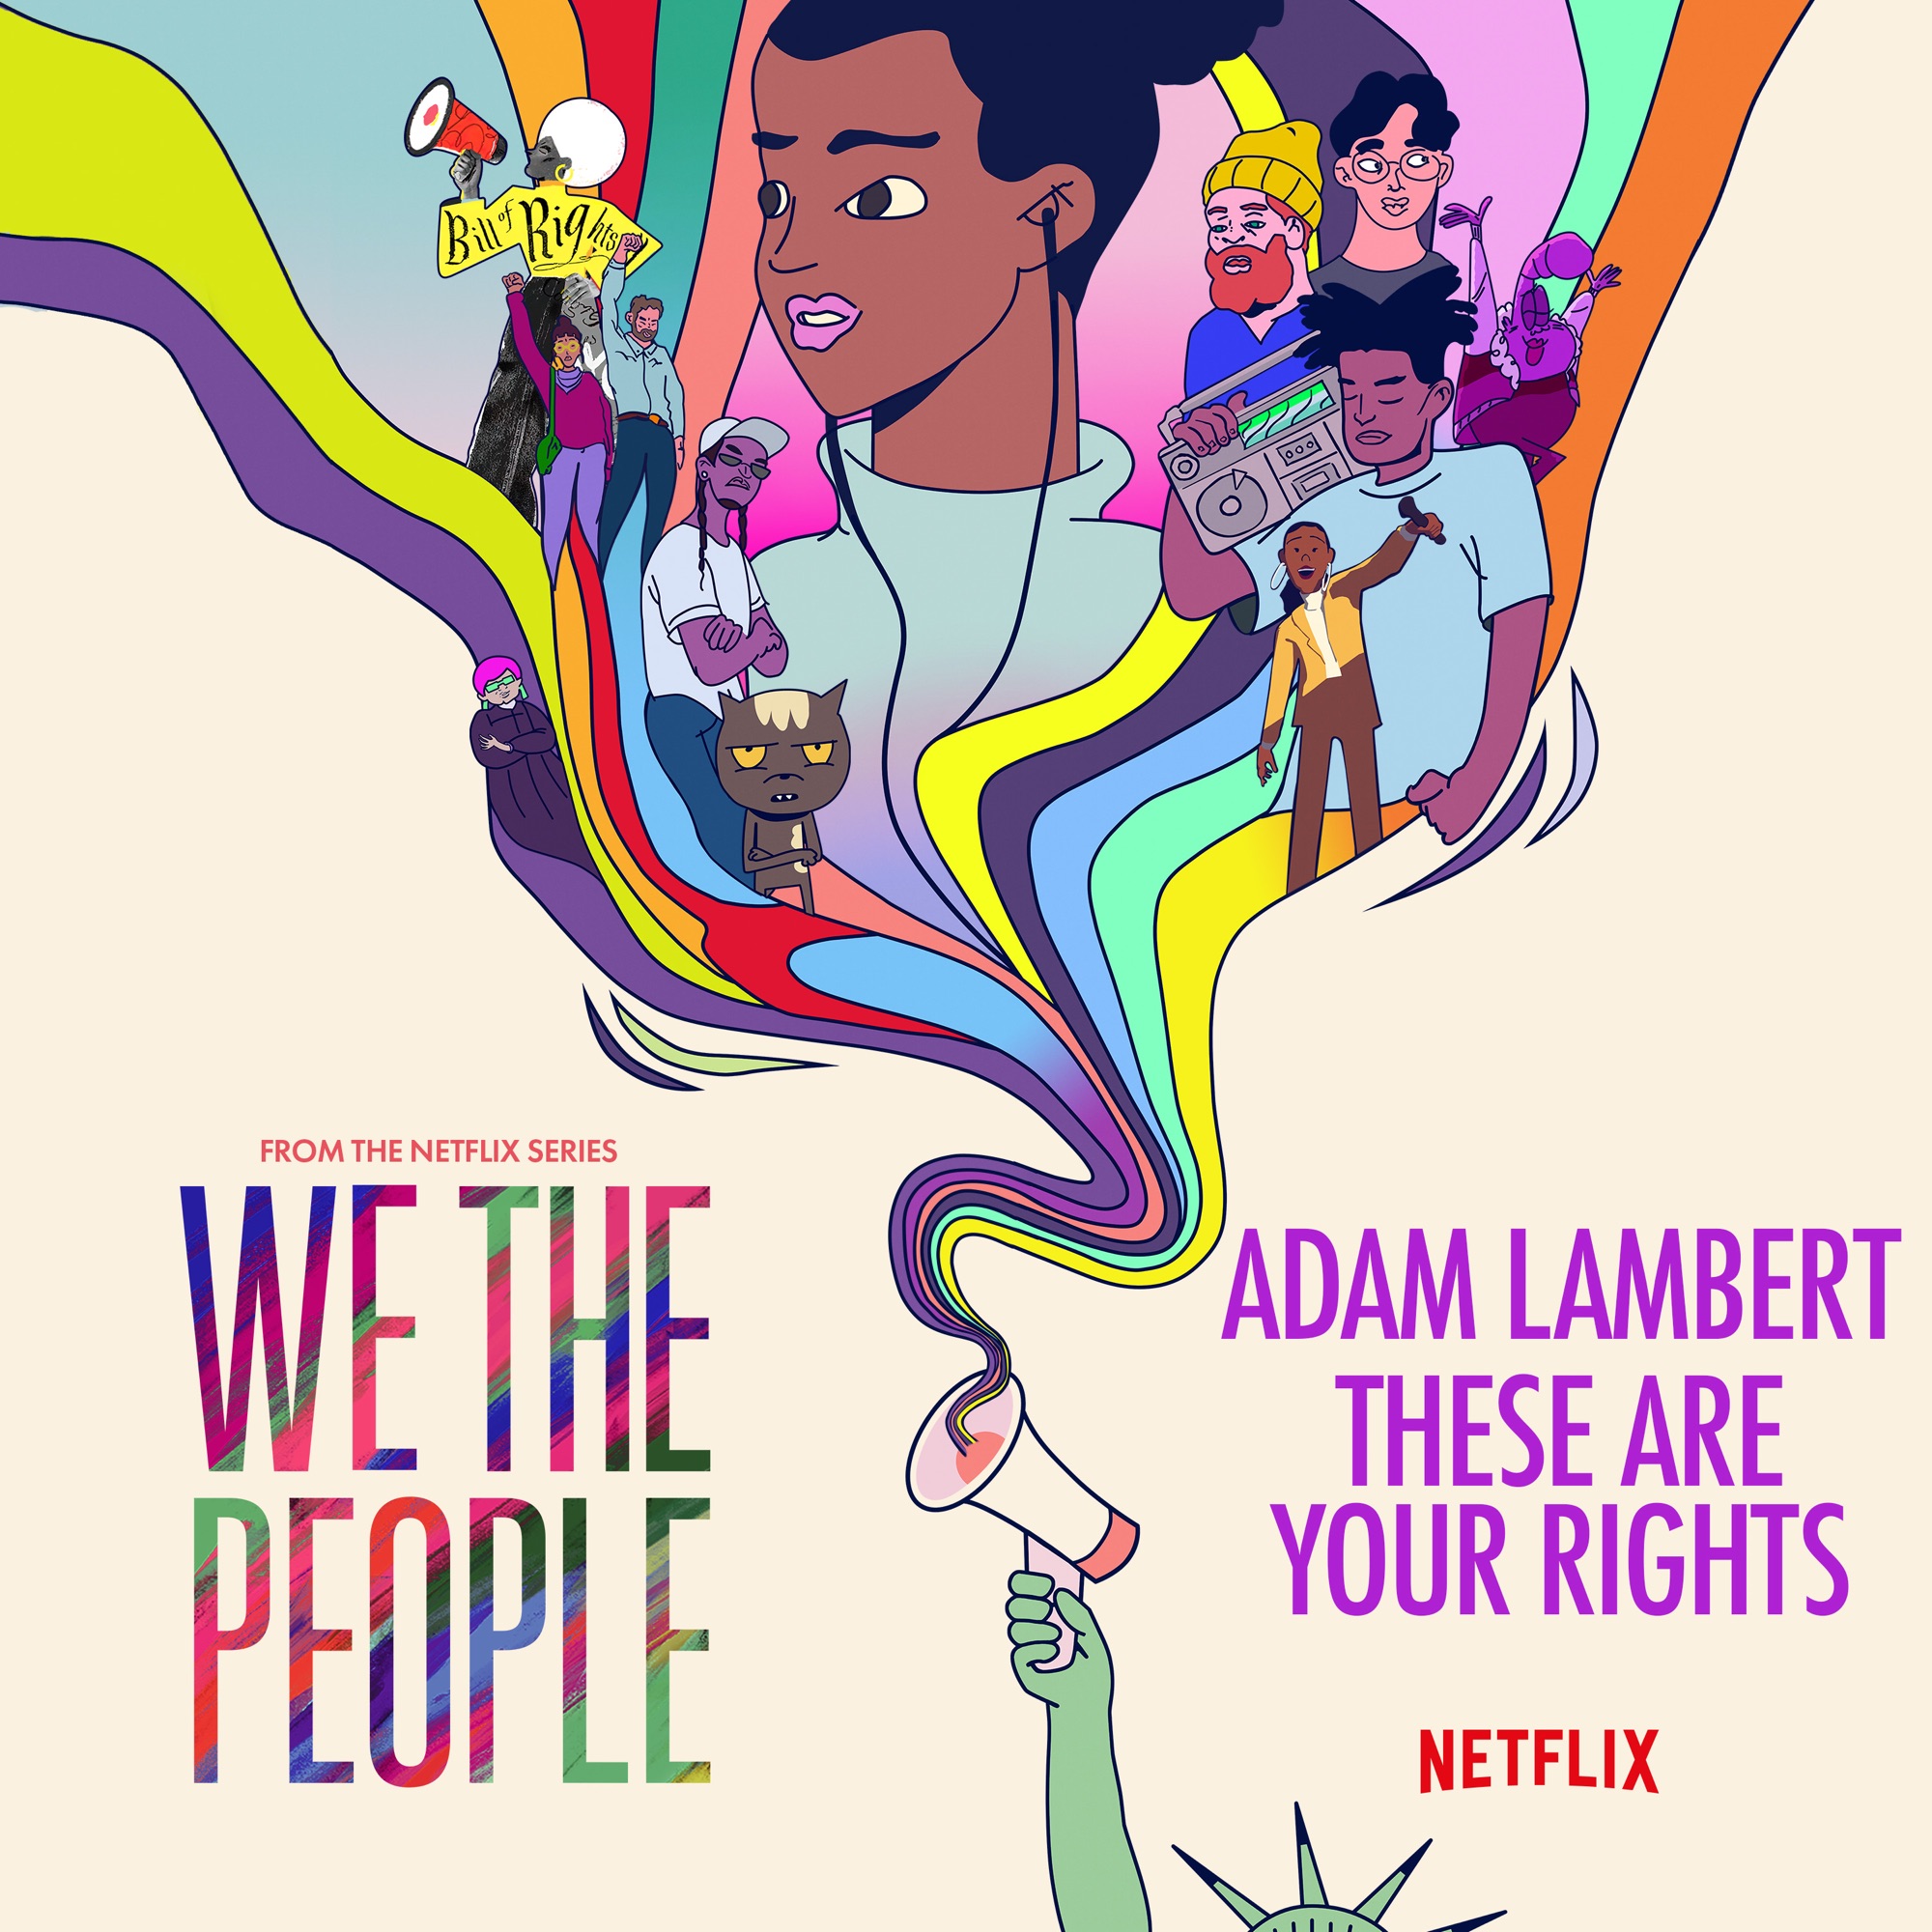 Adam Lambert - These Are Your Rights (from the Netflix Series "We the People") - Single